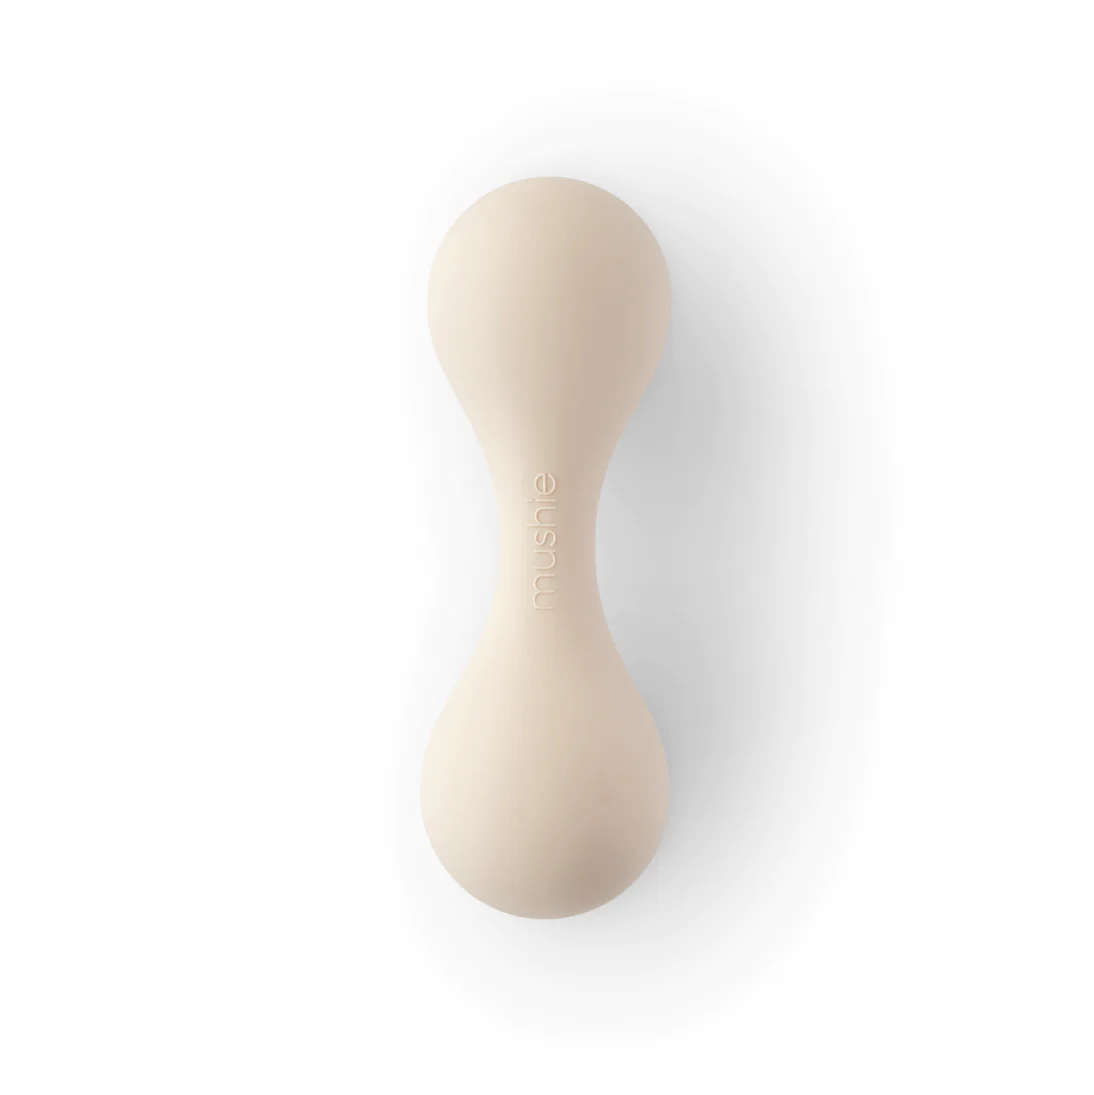 Silicone Baby Rattle Toy - Mushie